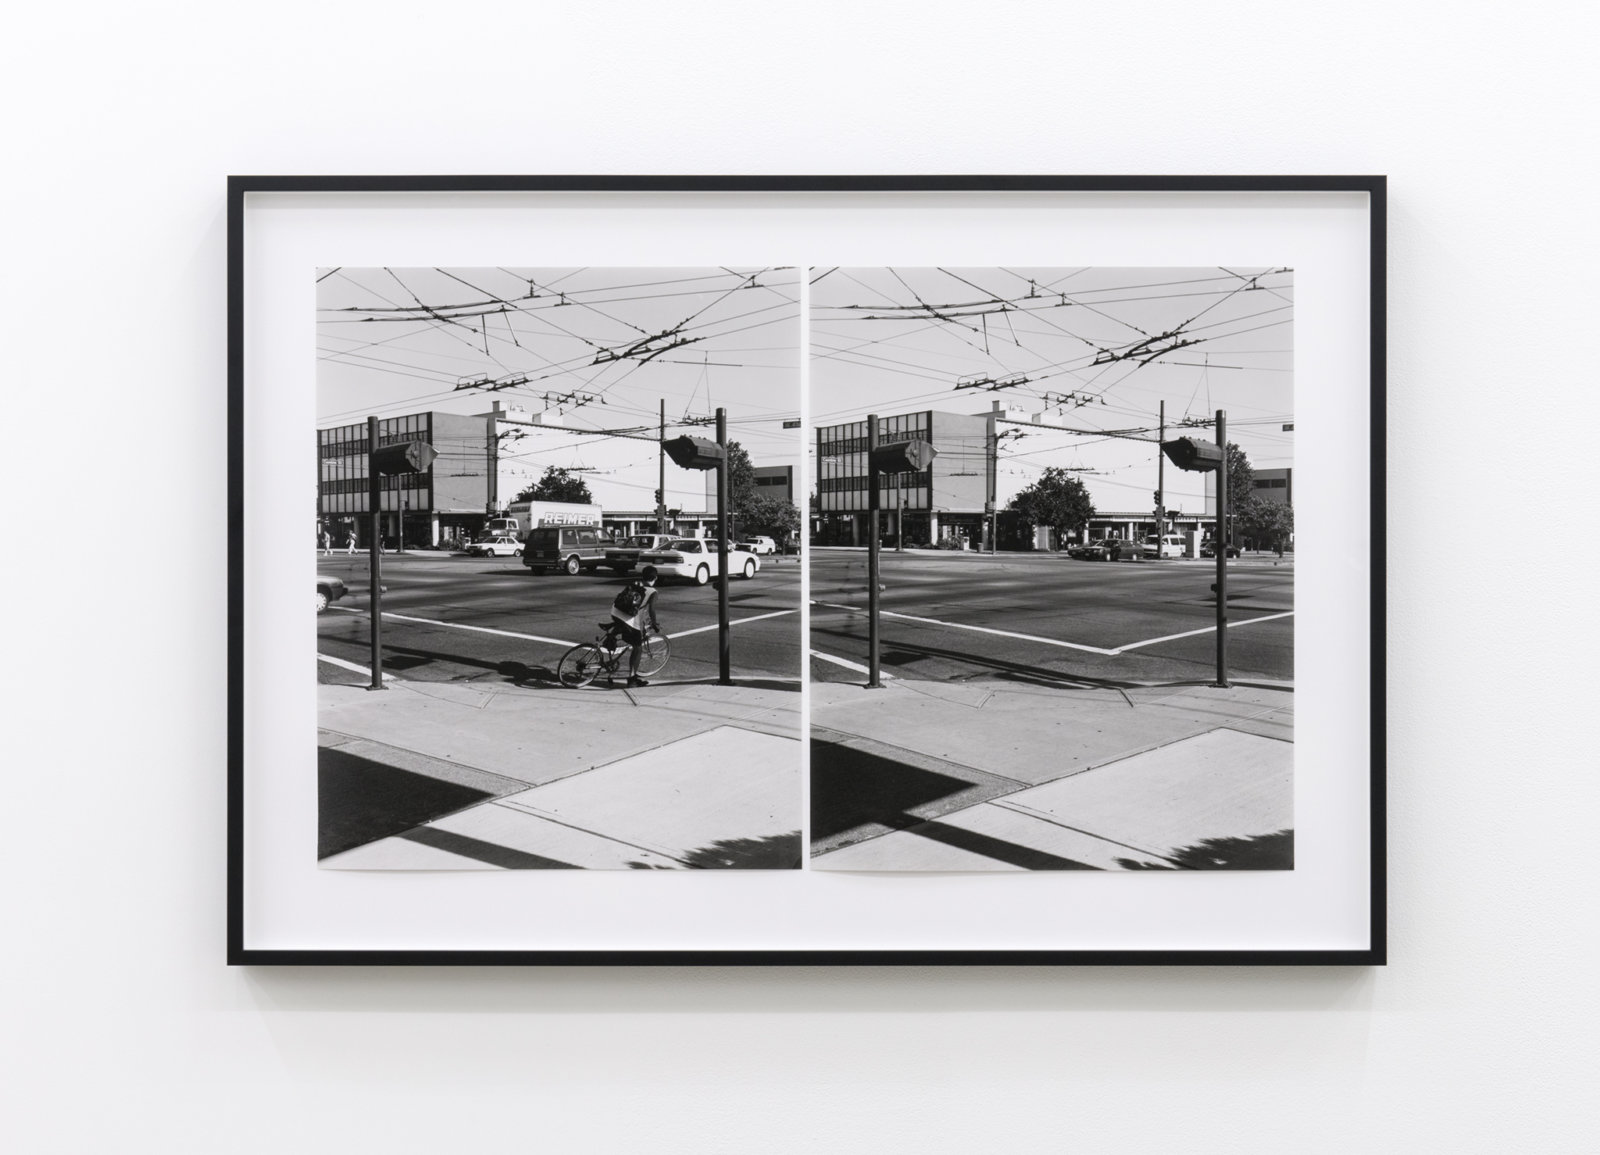 Ian Wallace, Intersection (Cambie and 41st Street), 1996, two black and white photographs, 23 x 19 in. (60 x 48 cm)